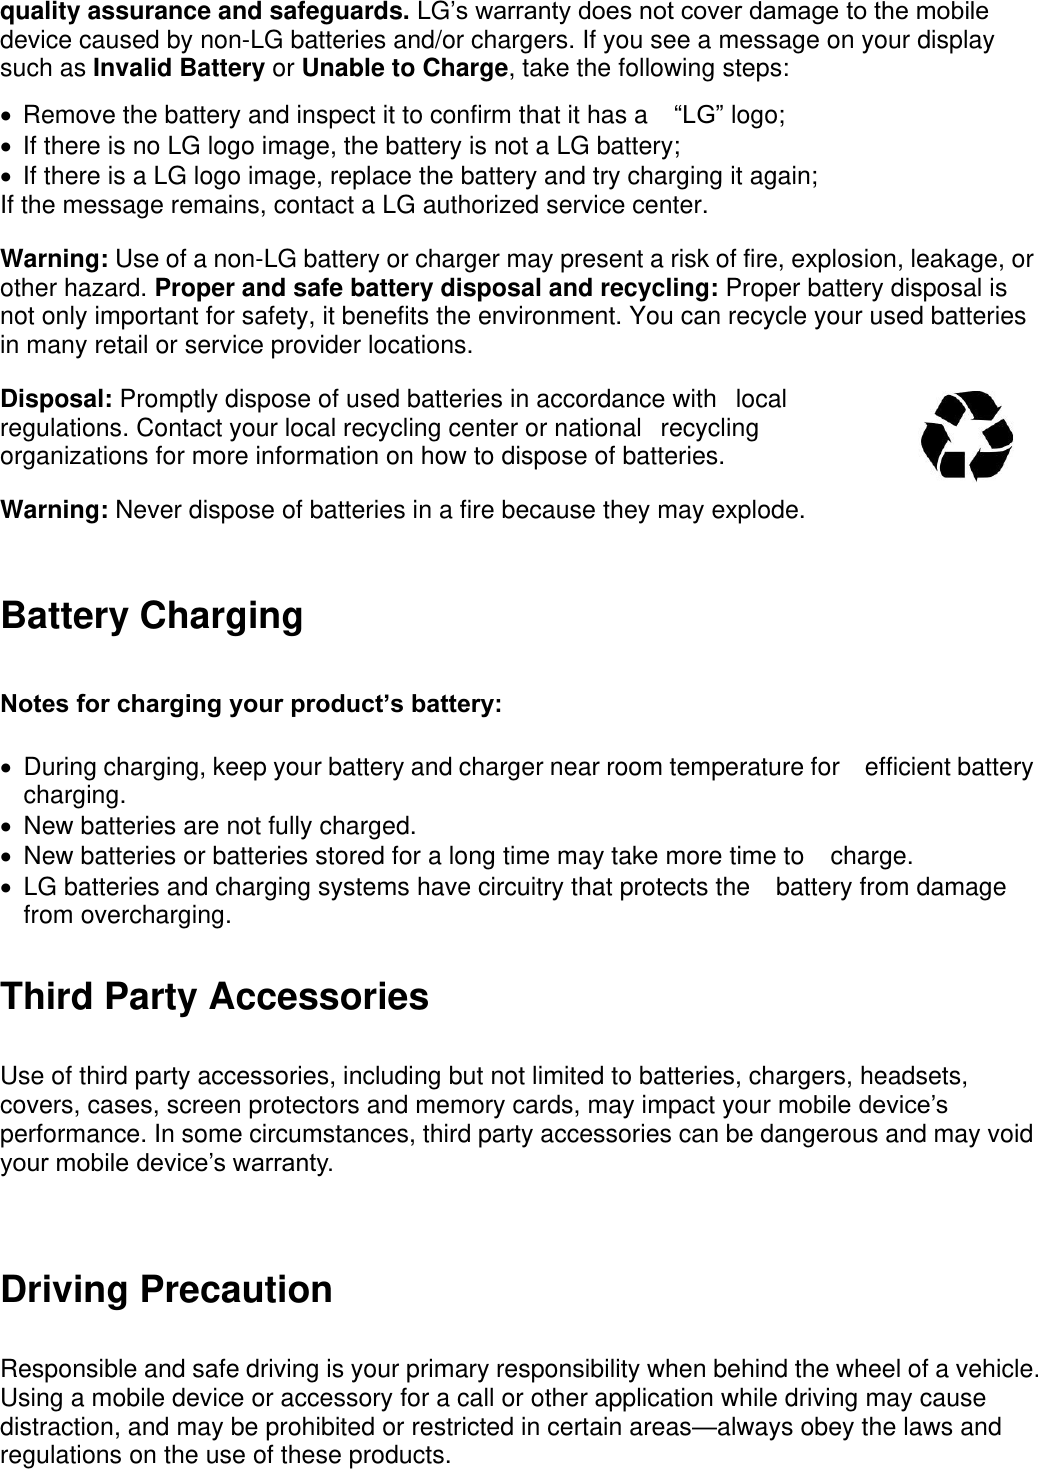 quality assurance and safeguards. LG’s warranty does not cover damage to the mobile device caused by non-LG batteries and/or chargers. If you see a message on your display such as Invalid Battery or Unable to Charge, take the following steps:   Remove the battery and inspect it to confirm that it has a “LG” logo;     If there is no LG logo image, the battery is not a LG battery;     If there is a LG logo image, replace the battery and try charging it again;   If the message remains, contact a LG authorized service center.   Warning: Use of a non-LG battery or charger may present a risk of fire, explosion, leakage, or other hazard. Proper and safe battery disposal and recycling: Proper battery disposal is not only important for safety, it benefits the environment. You can recycle your used batteries in many retail or service provider locations.   Disposal: Promptly dispose of used batteries in accordance withlocal regulations. Contact your local recycling center or nationalrecycling organizations for more information on how to dispose of batteries. Warning: Never dispose of batteries in a fire because they may explode. Battery Charging Notes for charging your product’s battery:     During charging, keep your battery and charger near room temperature for efficient battery charging.   New batteries are not fully charged.     New batteries or batteries stored for a long time may take more time to charge.     LG batteries and charging systems have circuitry that protects the battery from damage from overcharging. Third Party Accessories Use of third party accessories, including but not limited to batteries, chargers, headsets, covers, cases, screen protectors and memory cards, may impact your mobile device’s performance. In some circumstances, third party accessories can be dangerous and may void your mobile device’s warranty.  Driving Precaution Responsible and safe driving is your primary responsibility when behind the wheel of a vehicle. Using a mobile device or accessory for a call or other application while driving may cause distraction, and may be prohibited or restricted in certain areas—always obey the laws and regulations on the use of these products.  